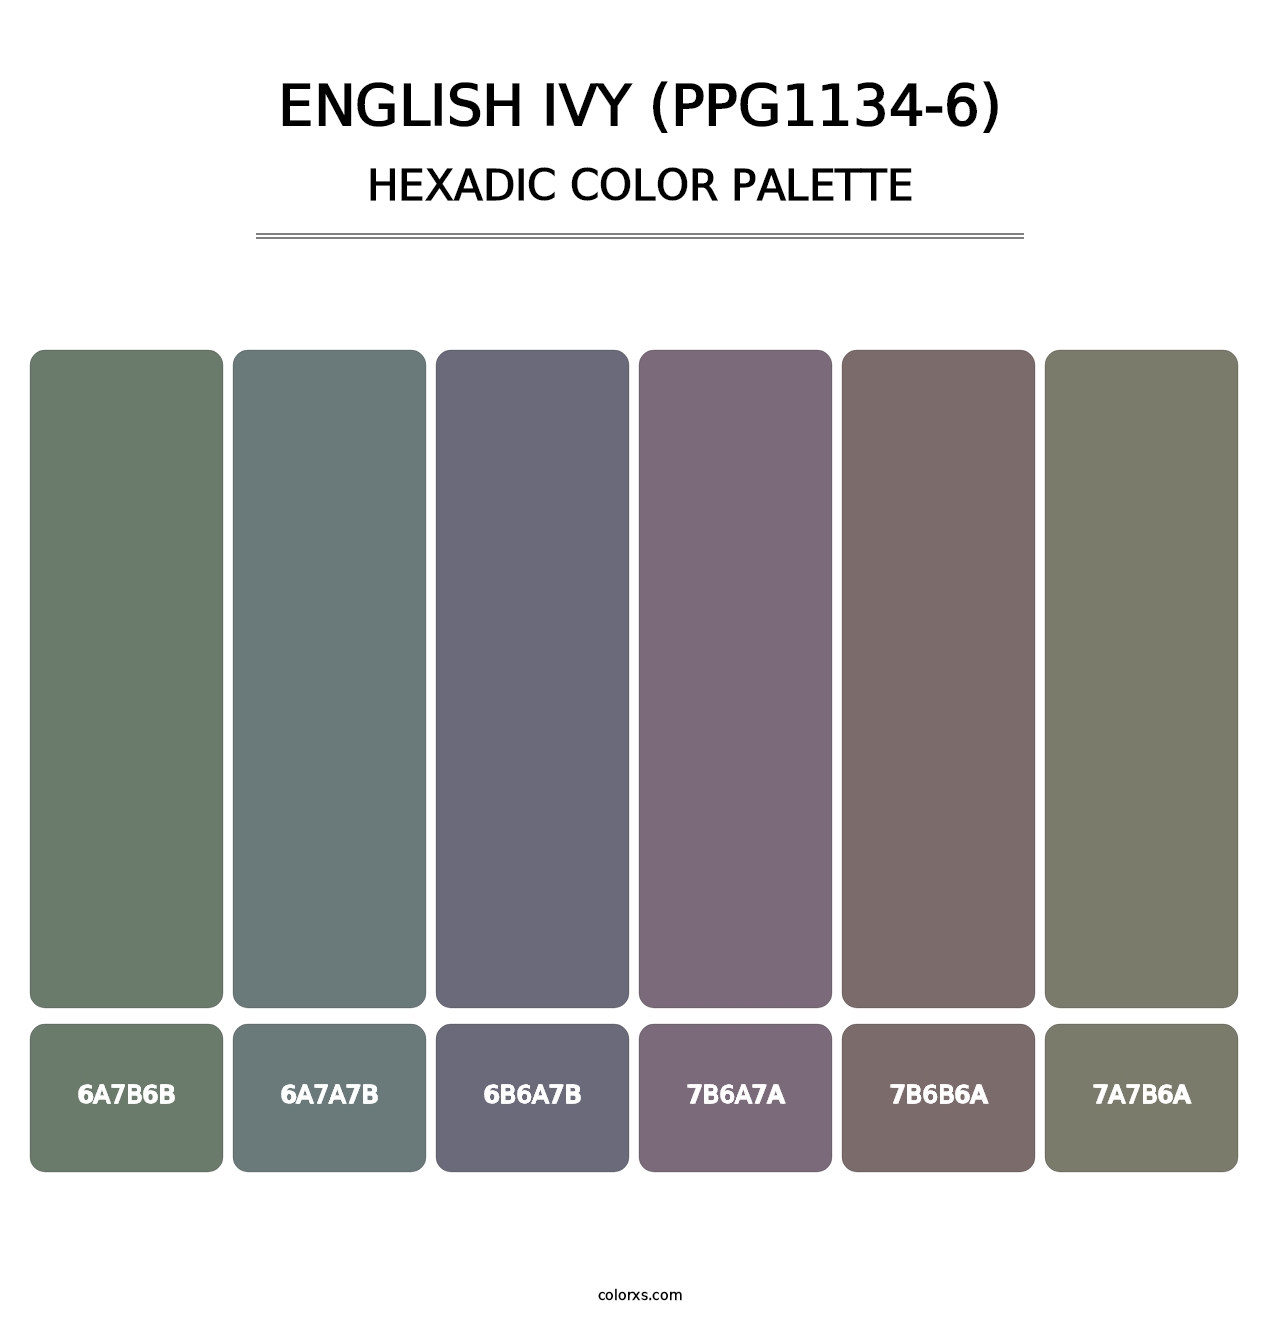 English Ivy (PPG1134-6) - Hexadic Color Palette